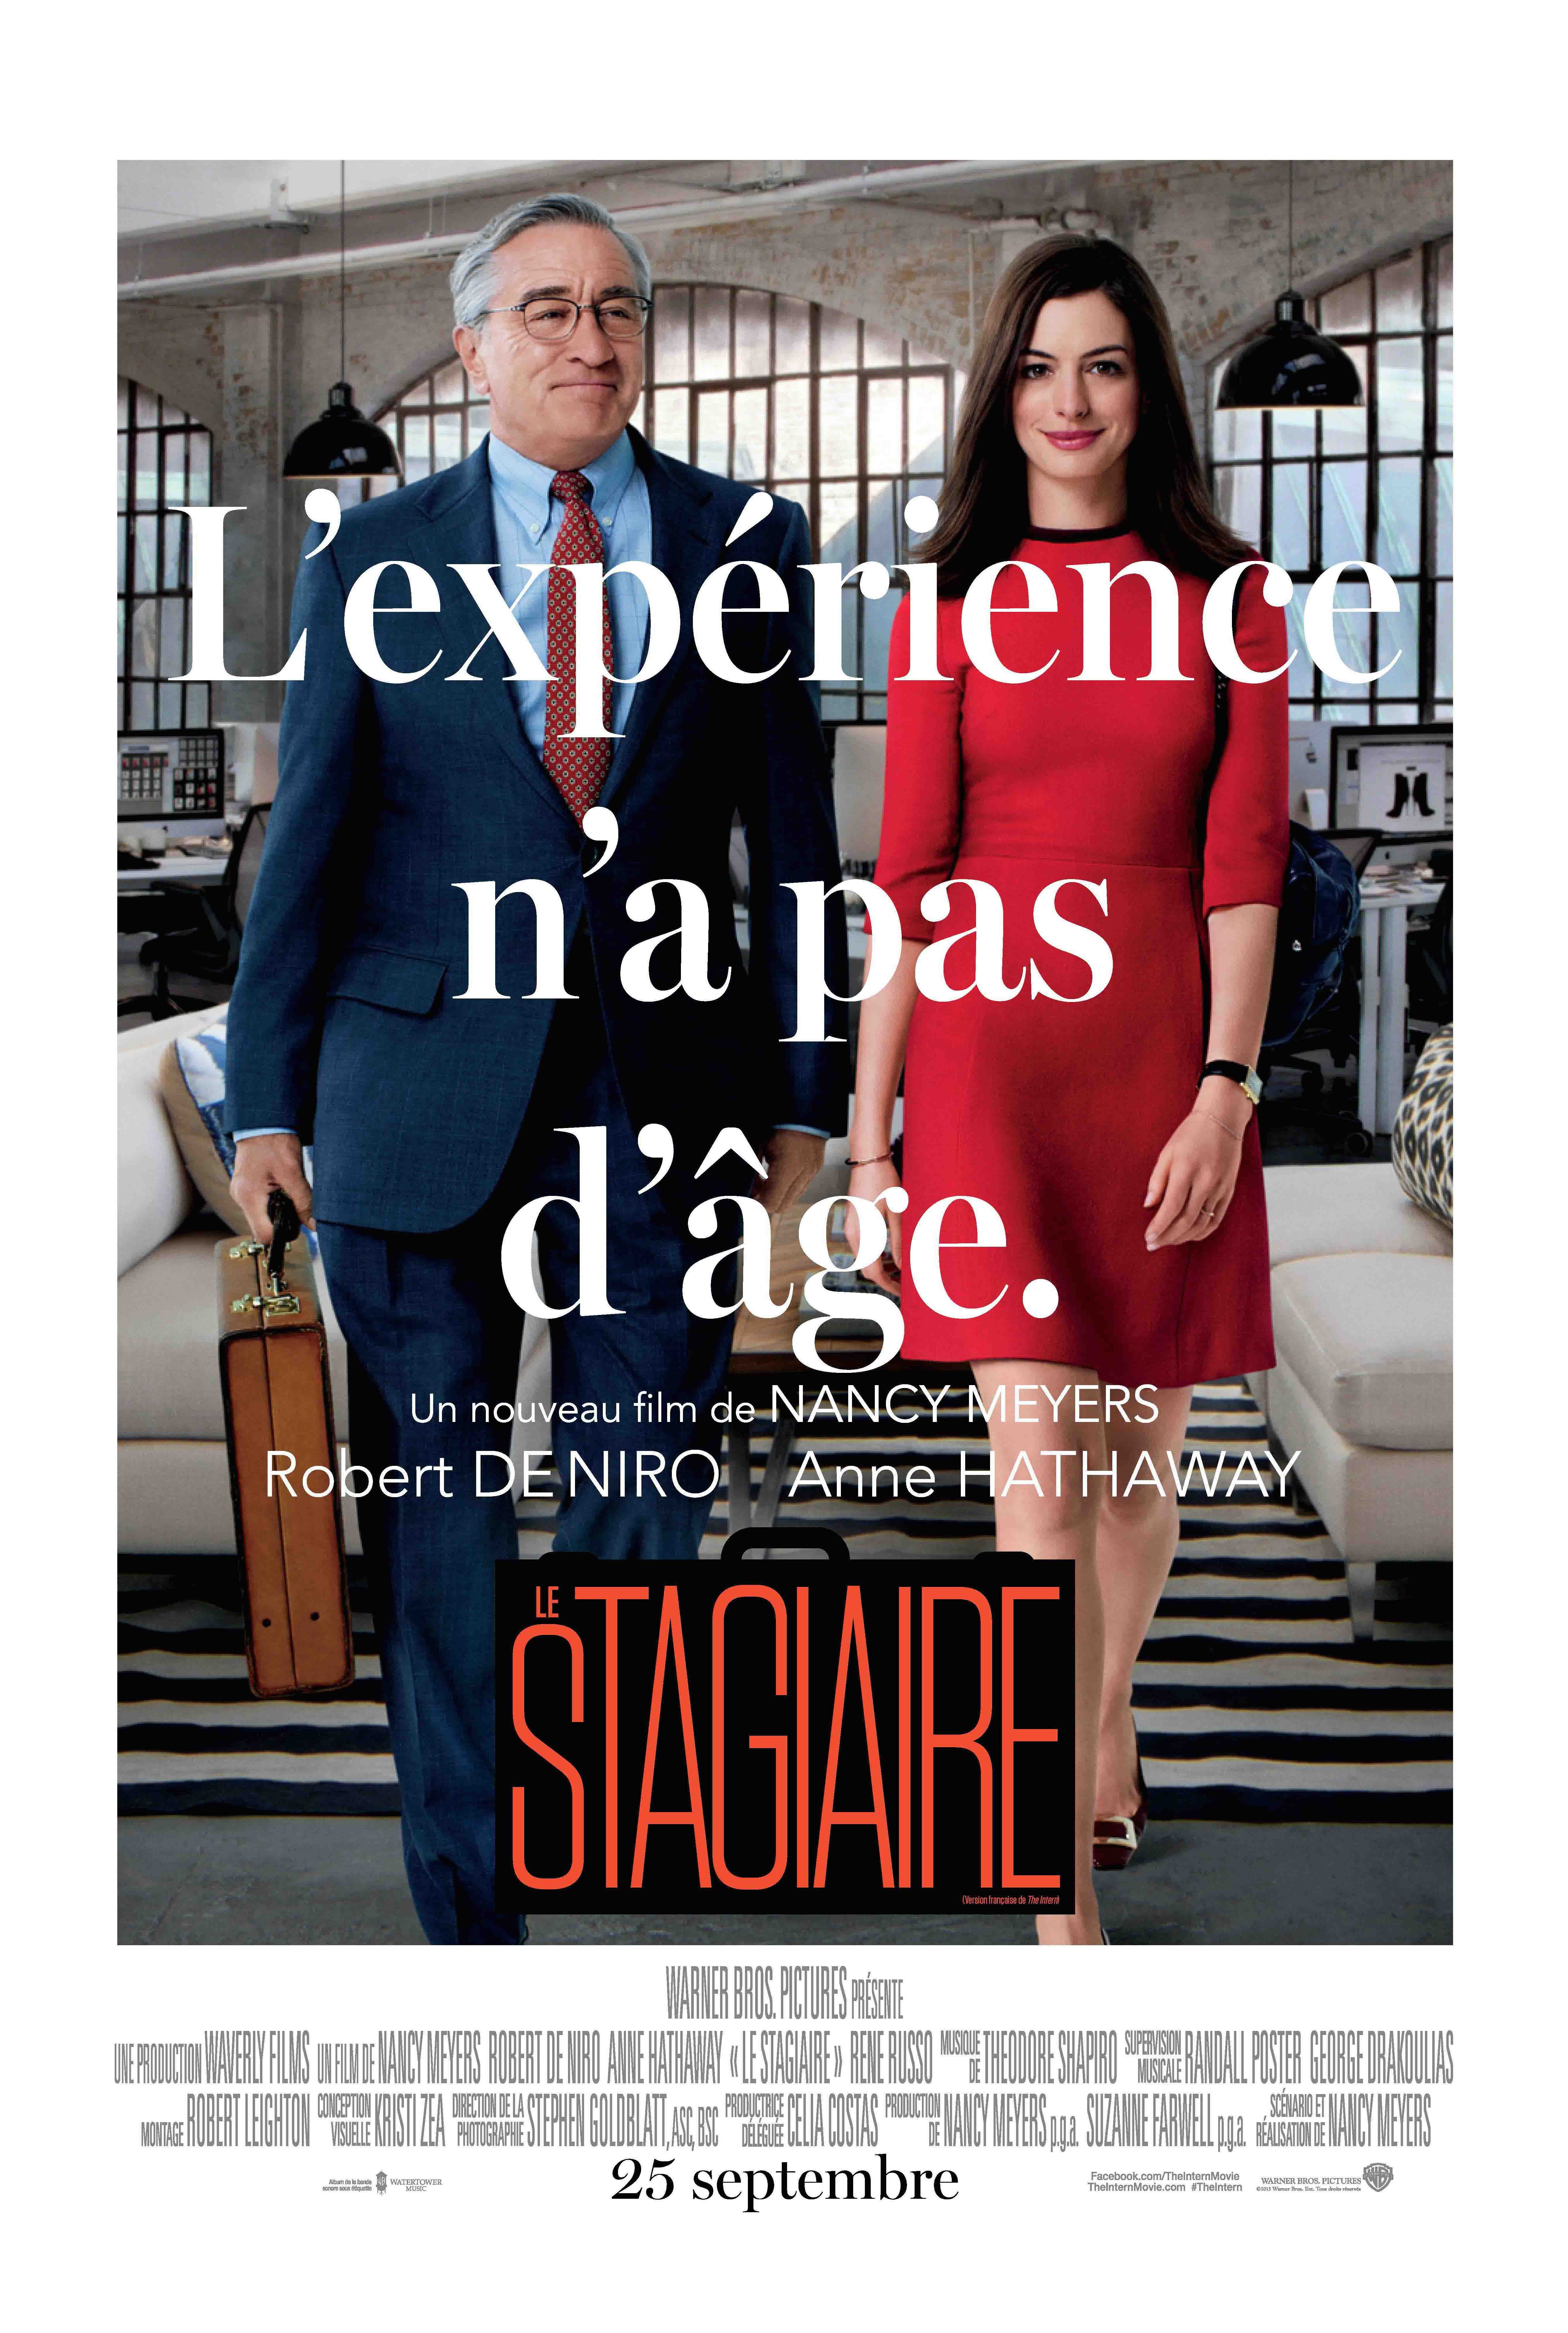 Poster of the movie Le Stagiaire